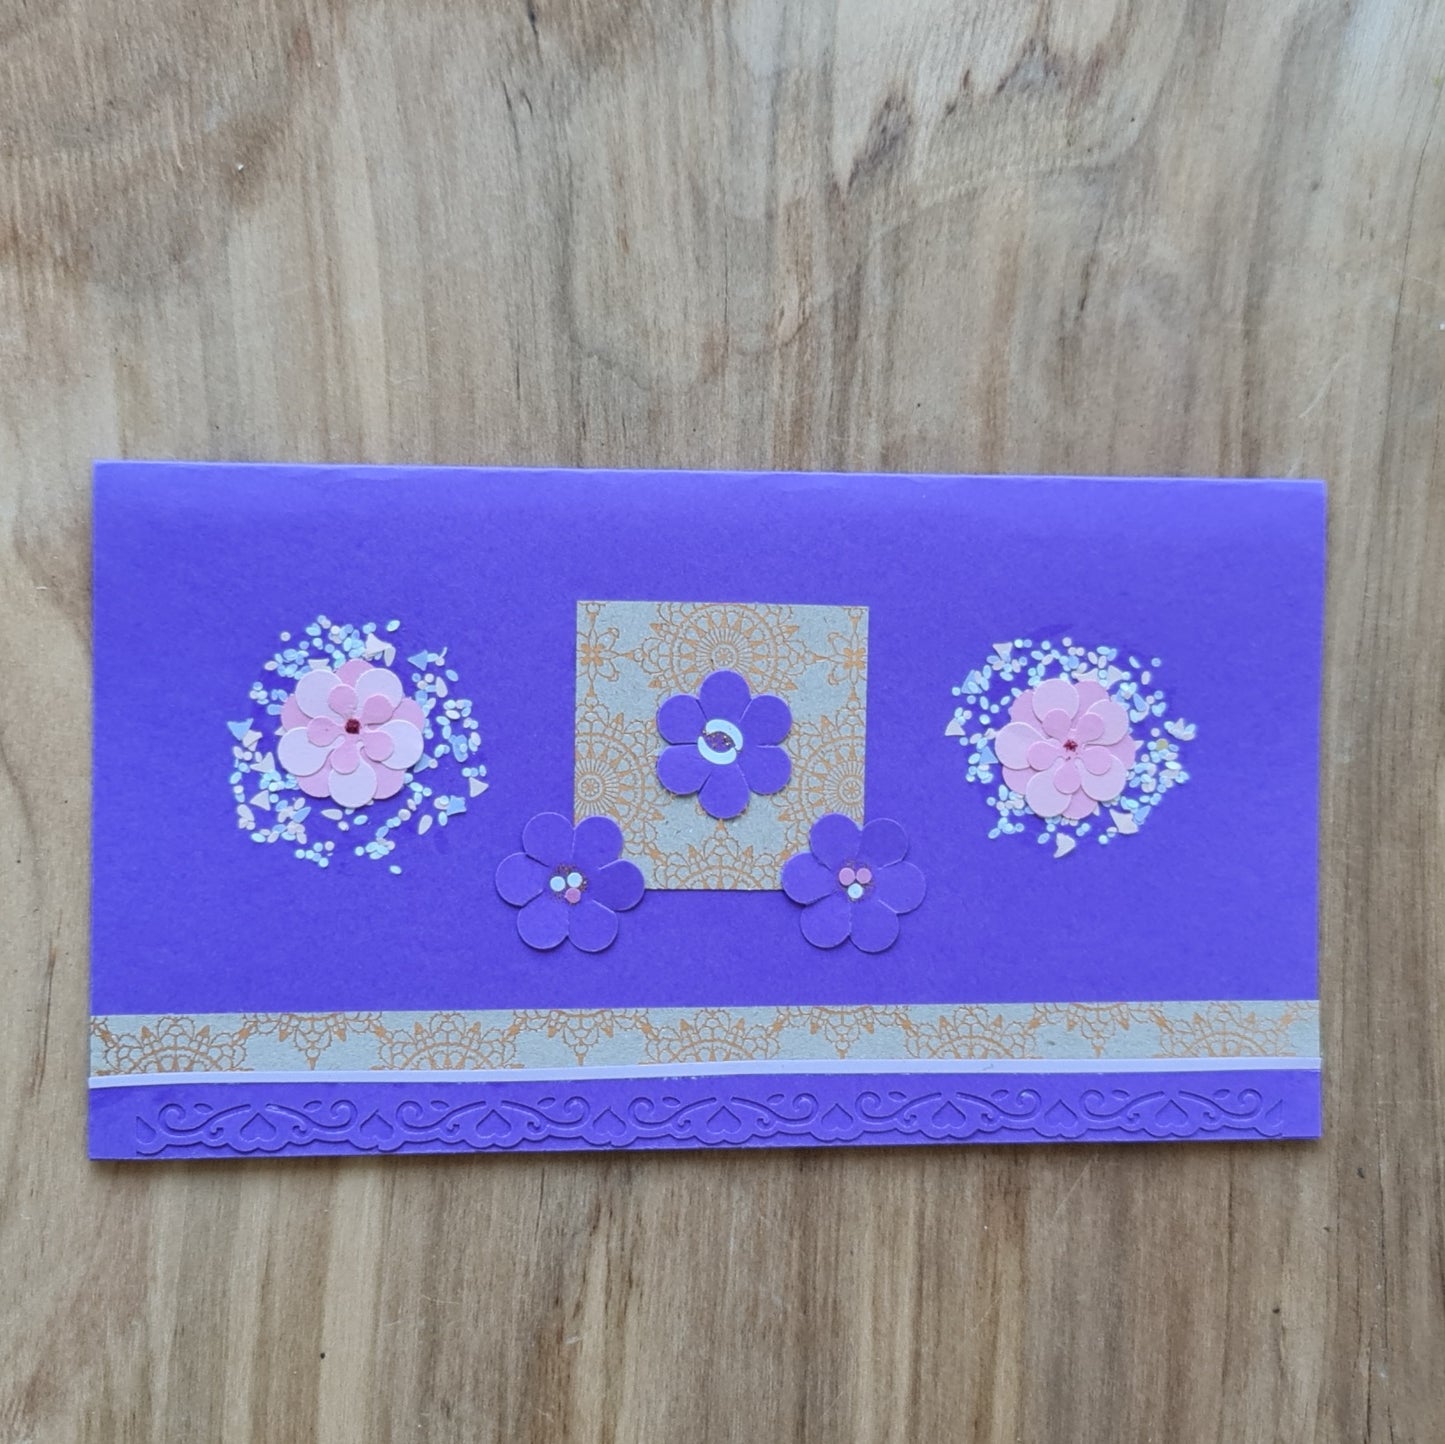 Paper card in 3D purple color with pink and gold floral decorations and lace border 21 x 10.5 cm (AMA)